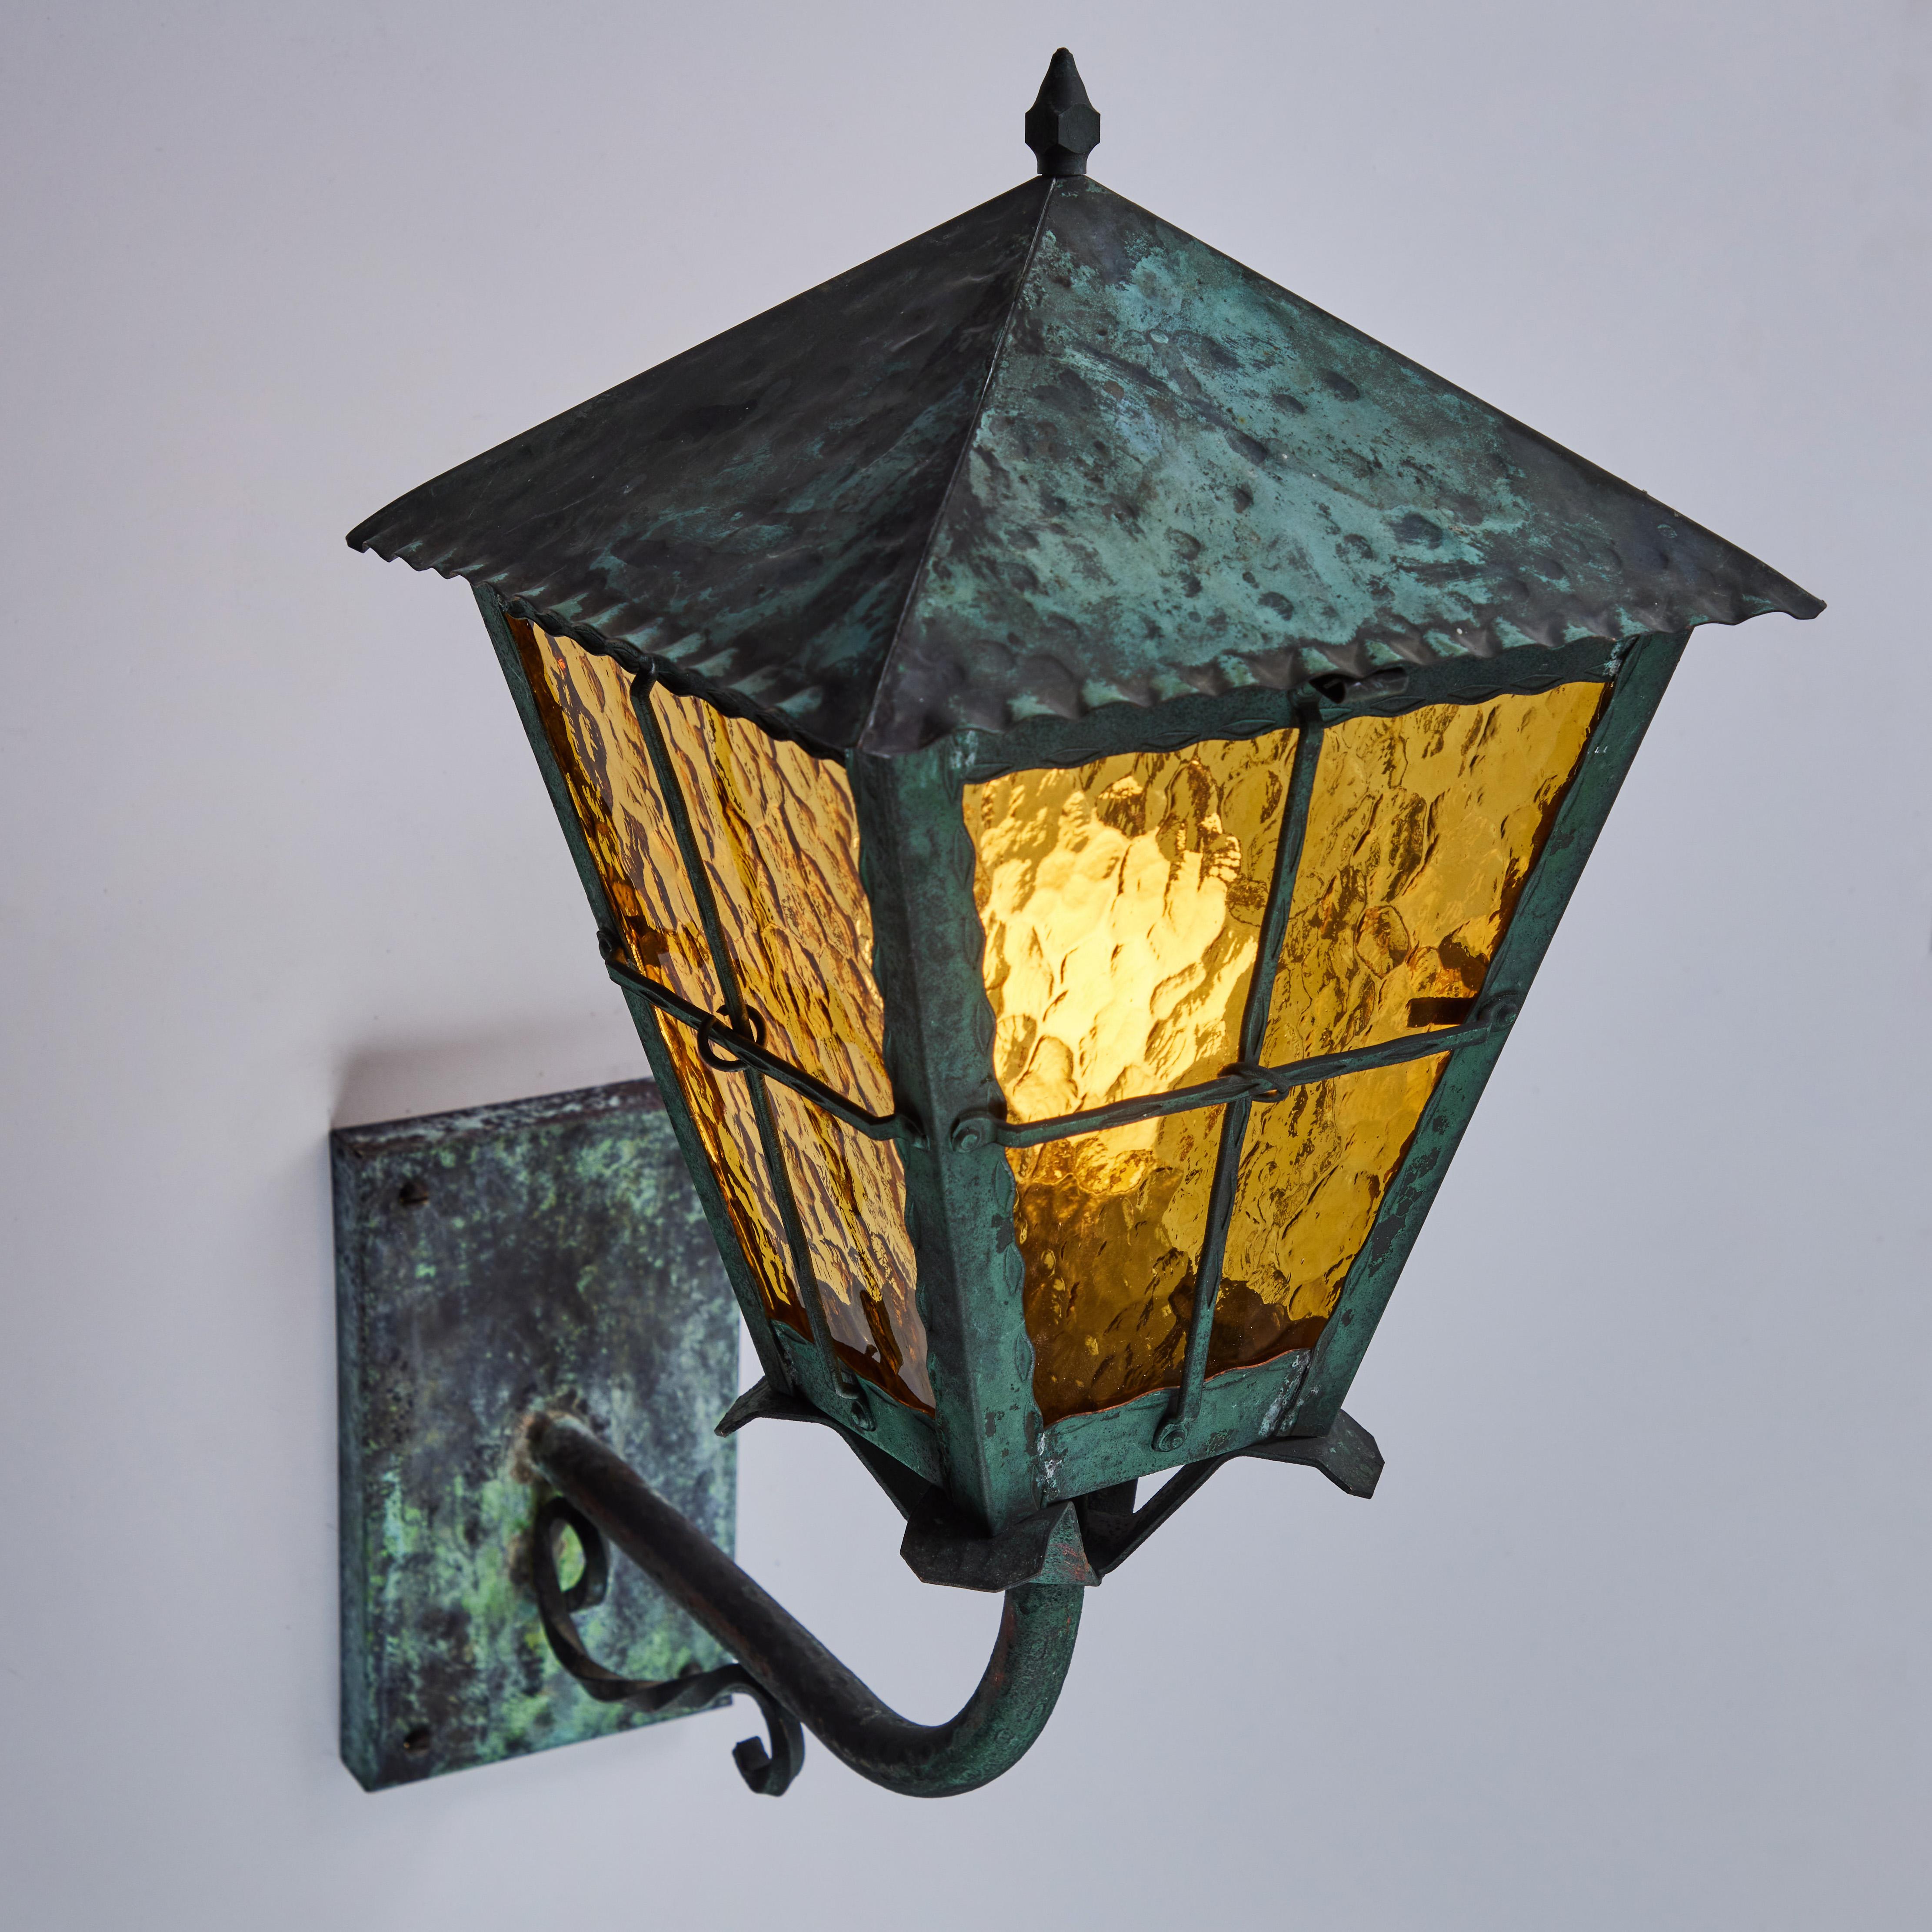 1950s large Scandinavian outdoor wall light in patinated copper and amber glass. Designer unknown. Executed in richly patinated copper and textured amber glass. A highly sculptural design, this outdoor or indoor wall light exudes Scandinavian